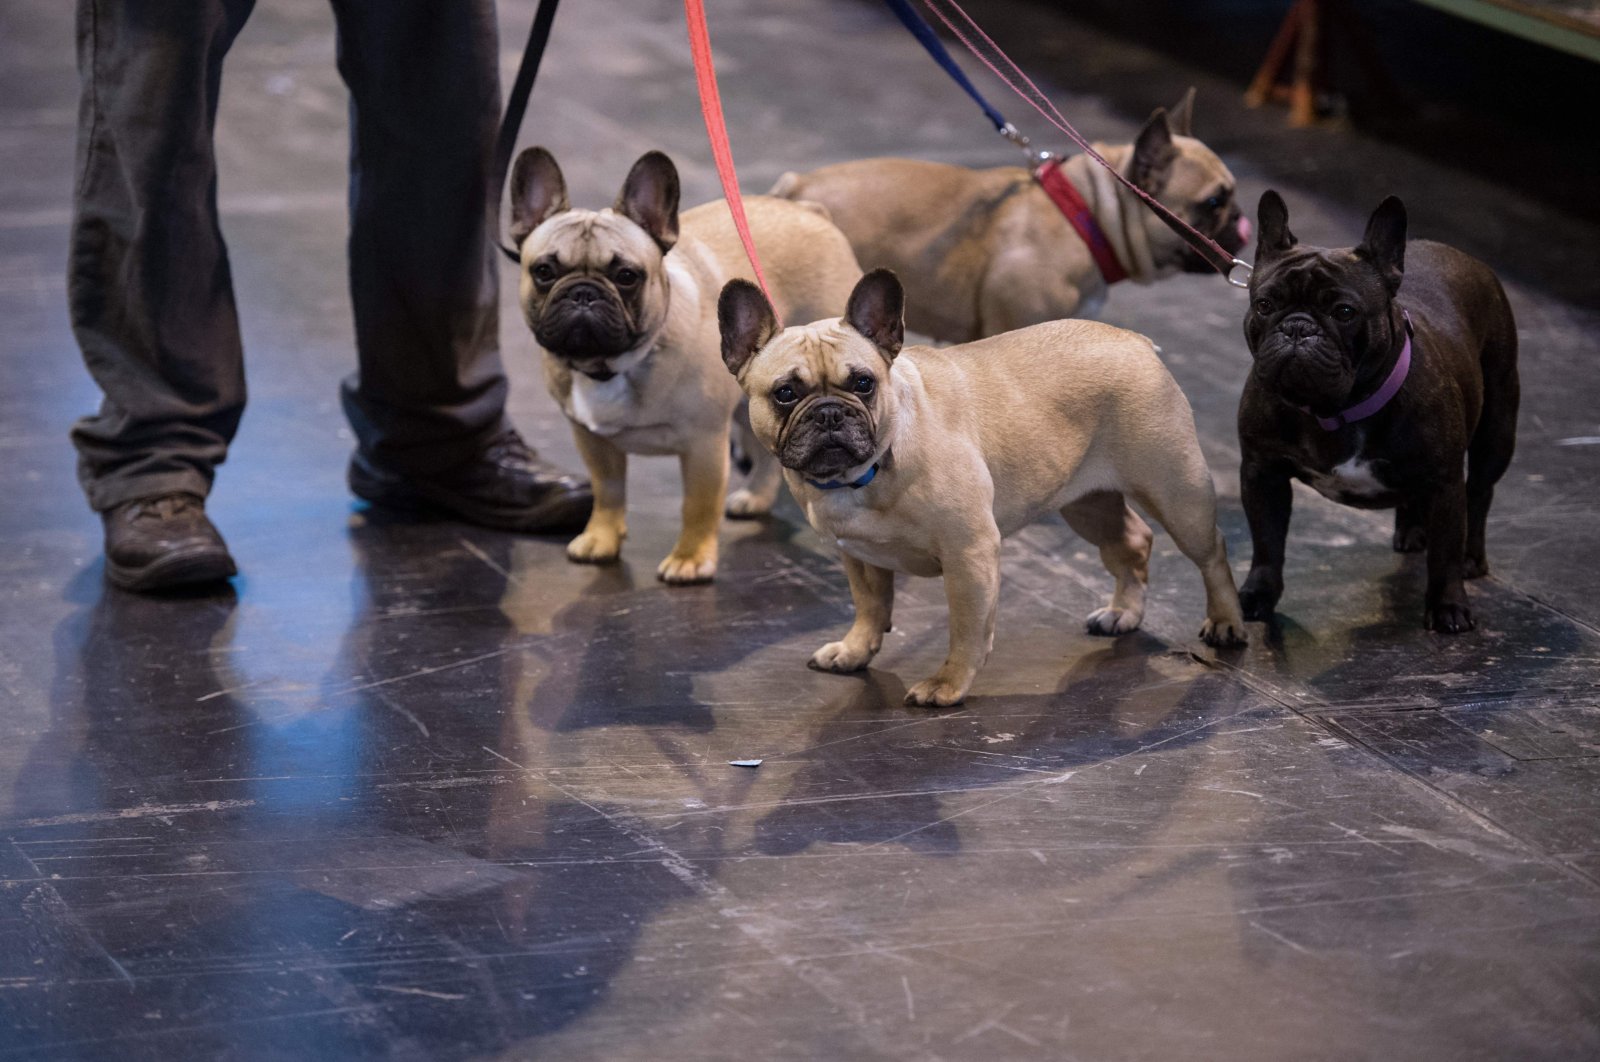 A dog owner gathers his four French bulldogs at the end of the second day of the Crufts dog show at the National Exhibition Centre in Birmingham, U.K., March 10, 2017. (AFP Photo)